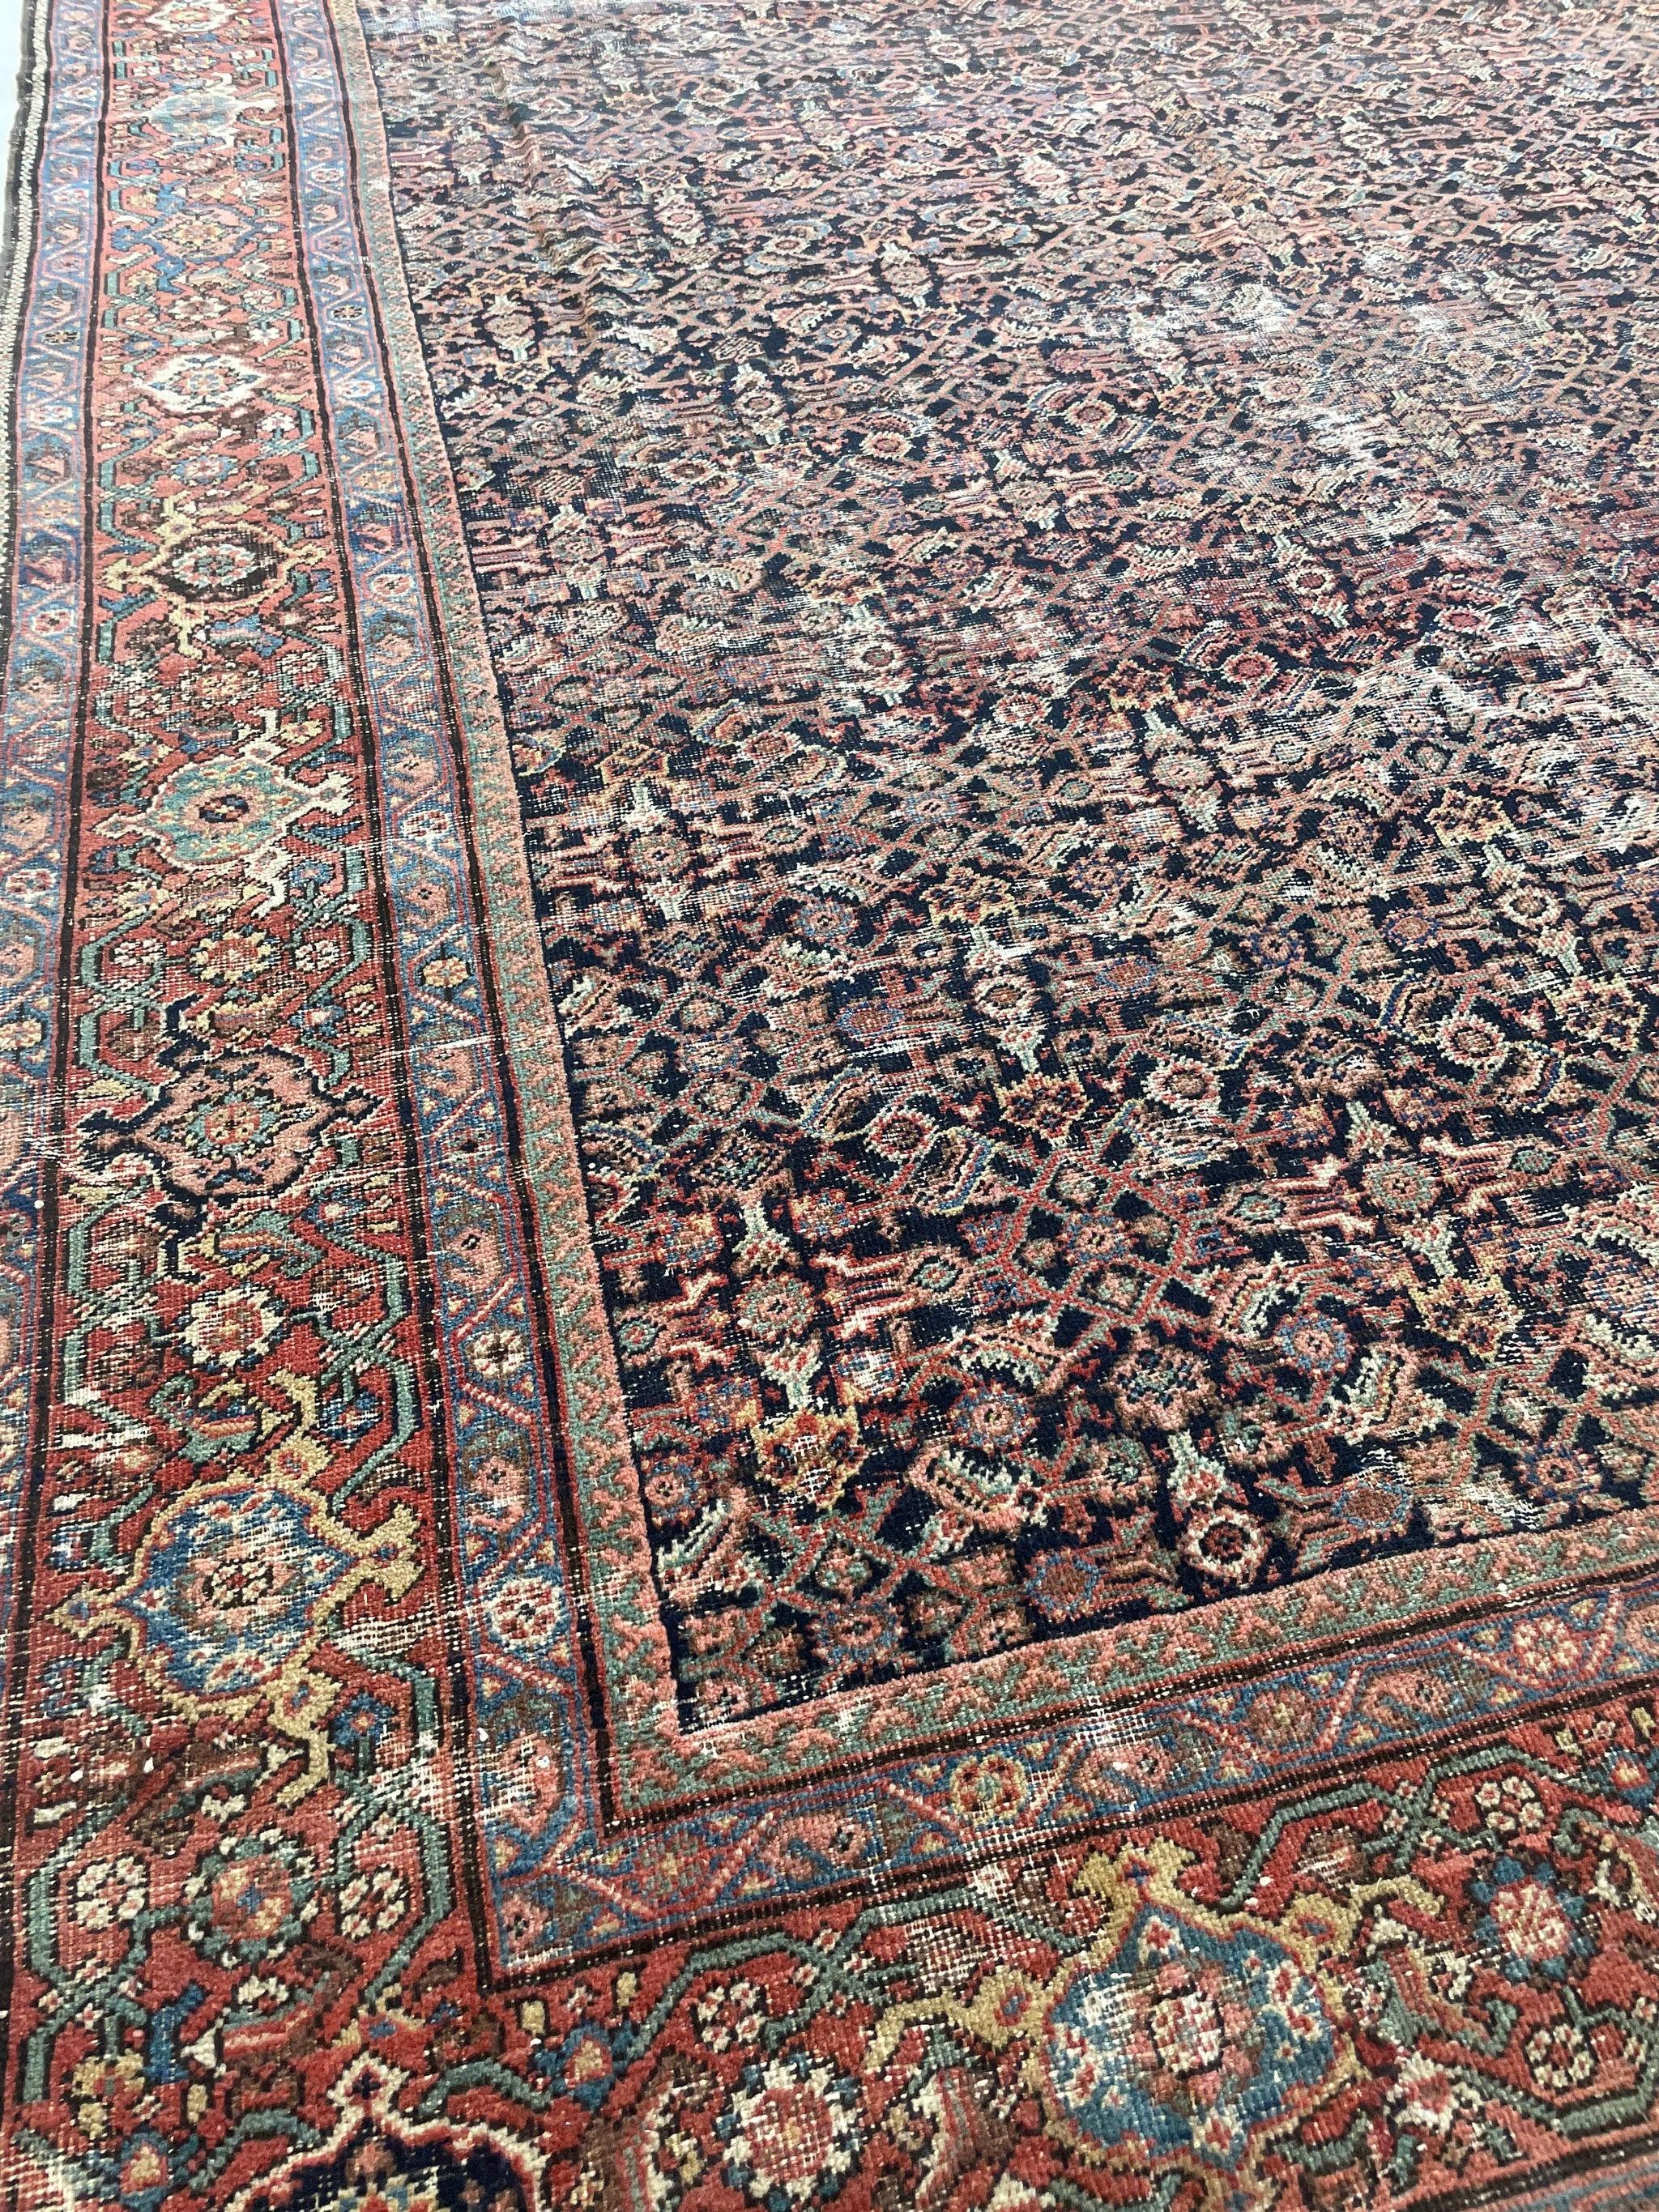 Genuine Antique Persian Carpet - Very Moody & Deep Old-World Indigo Feraghan-Mahal With Green, Rust, Honey.

About: This piece is very tricky to photograph because it is jam packed with so many colors and they all shift and sway like grass in the